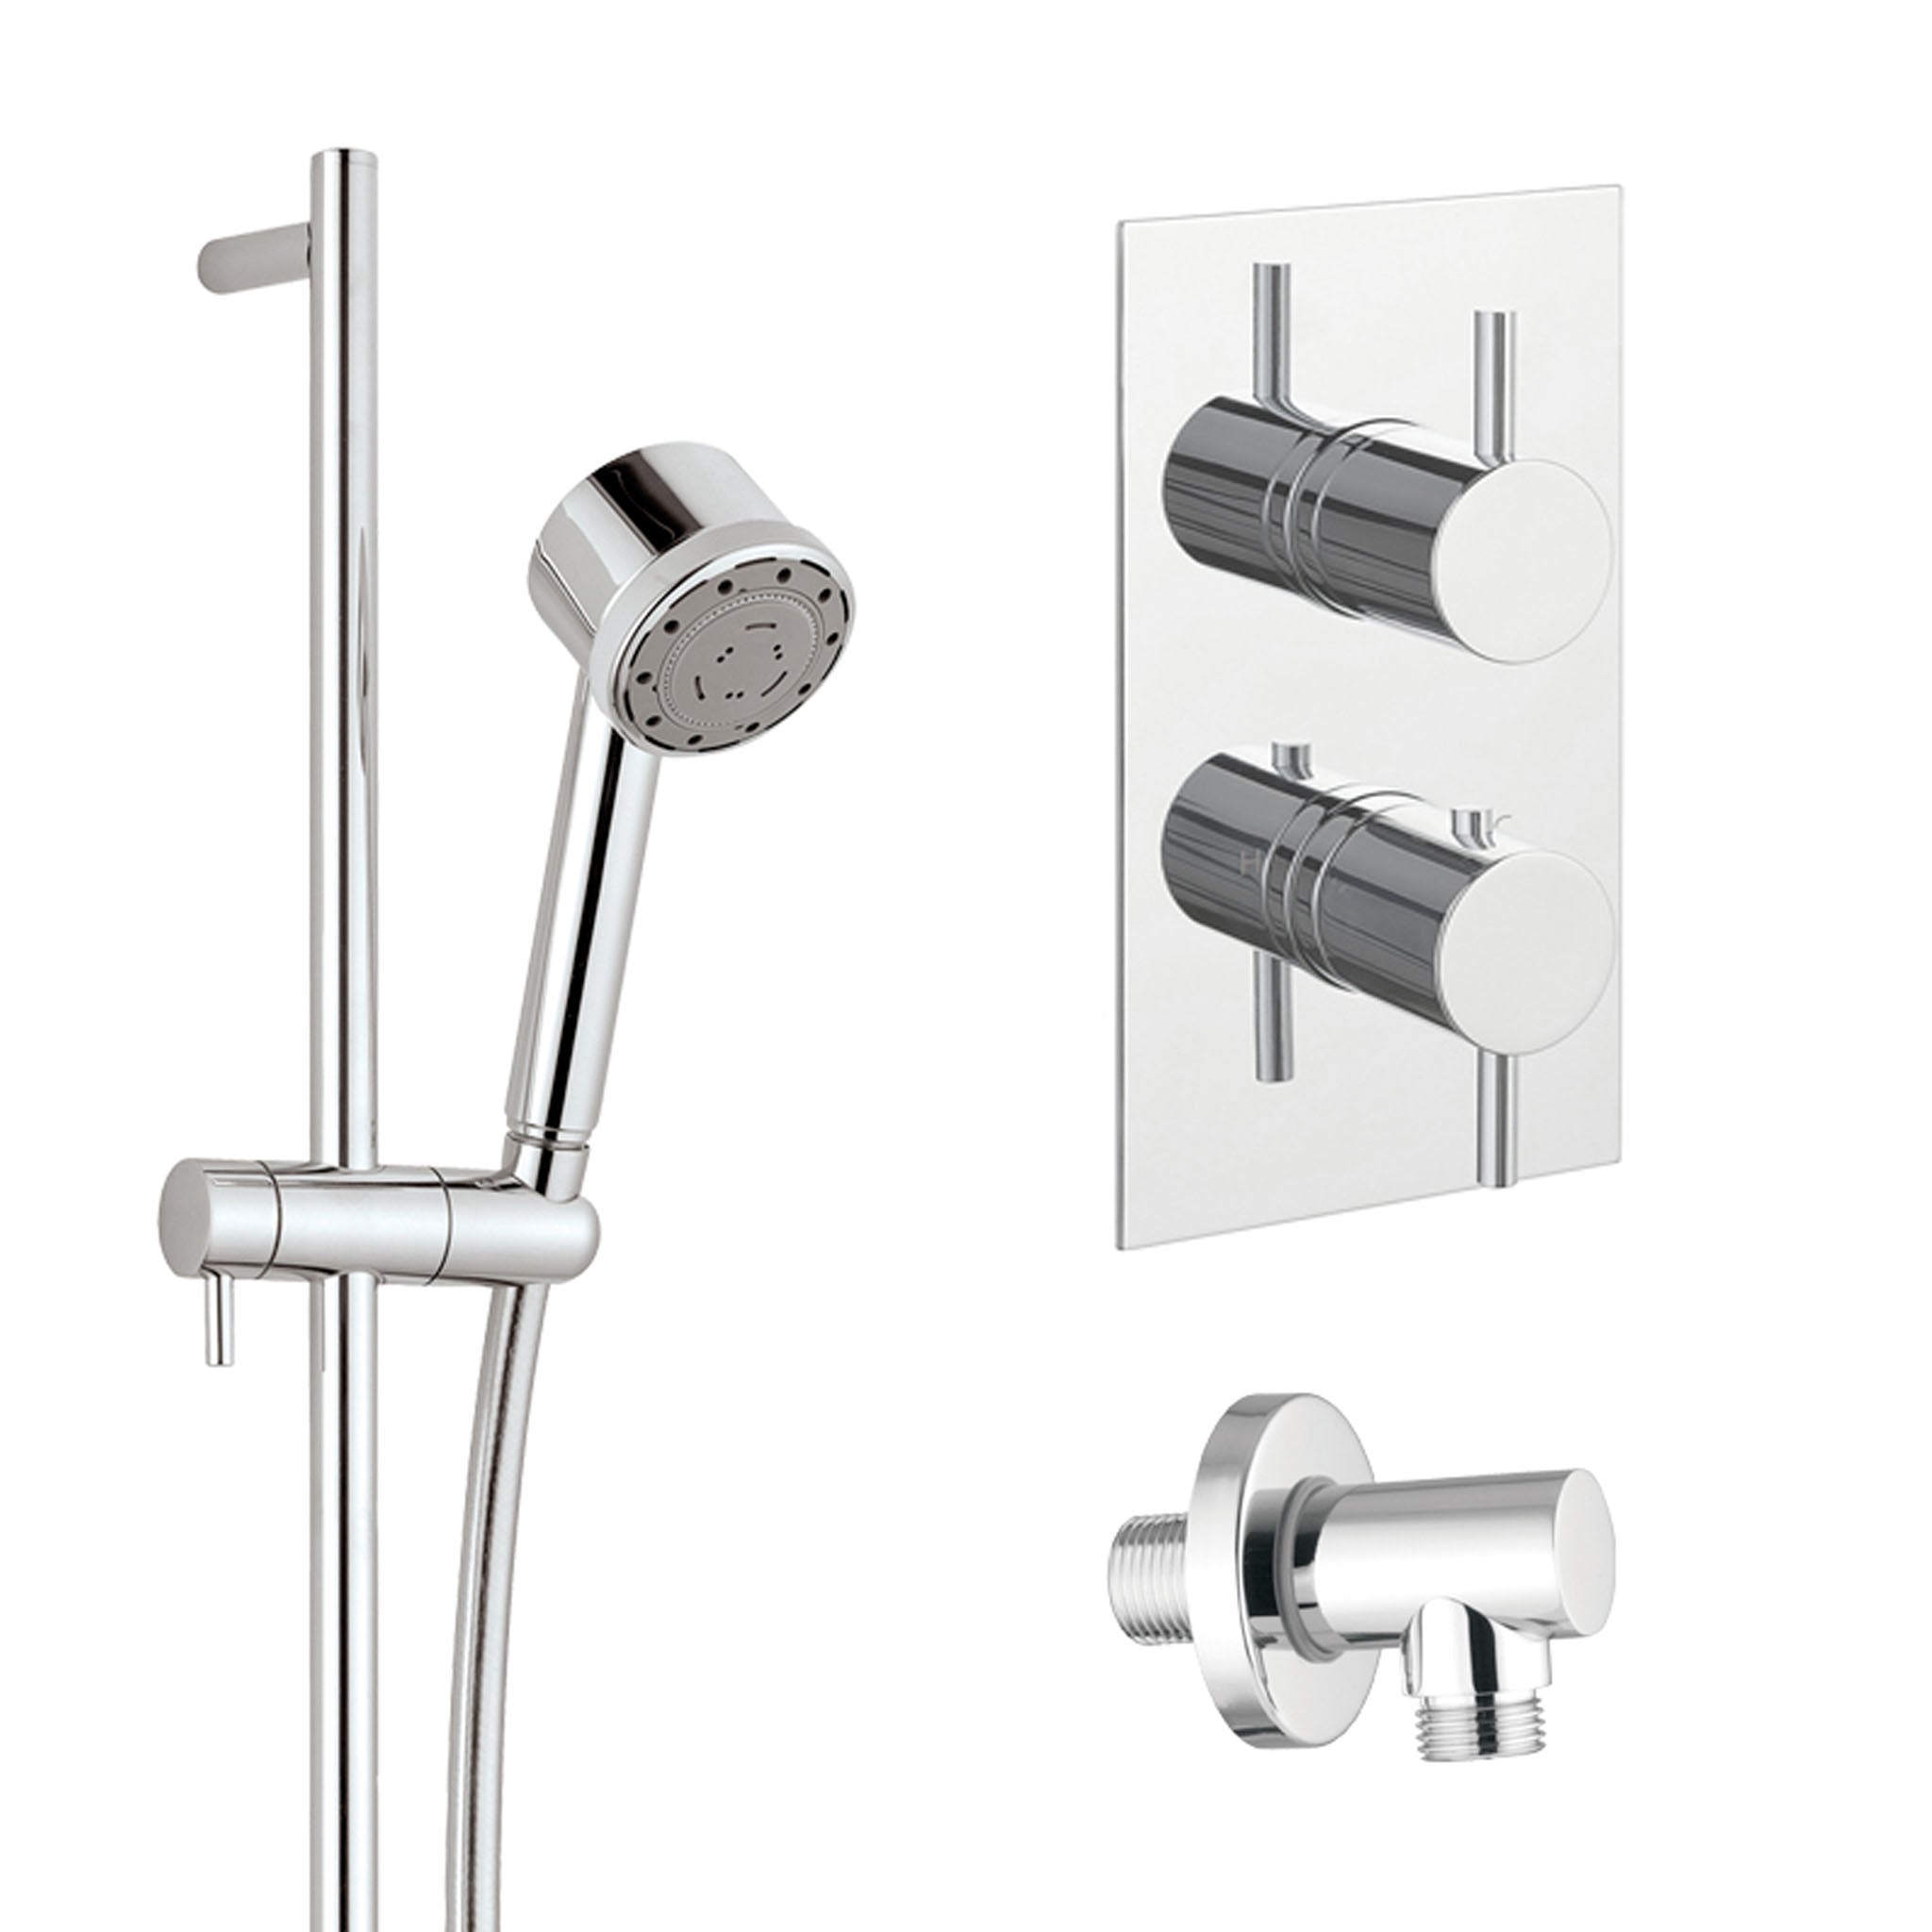 JTP Florence Wall Mounted Round Thermostatic Shower Valve With Slider Rail Kit